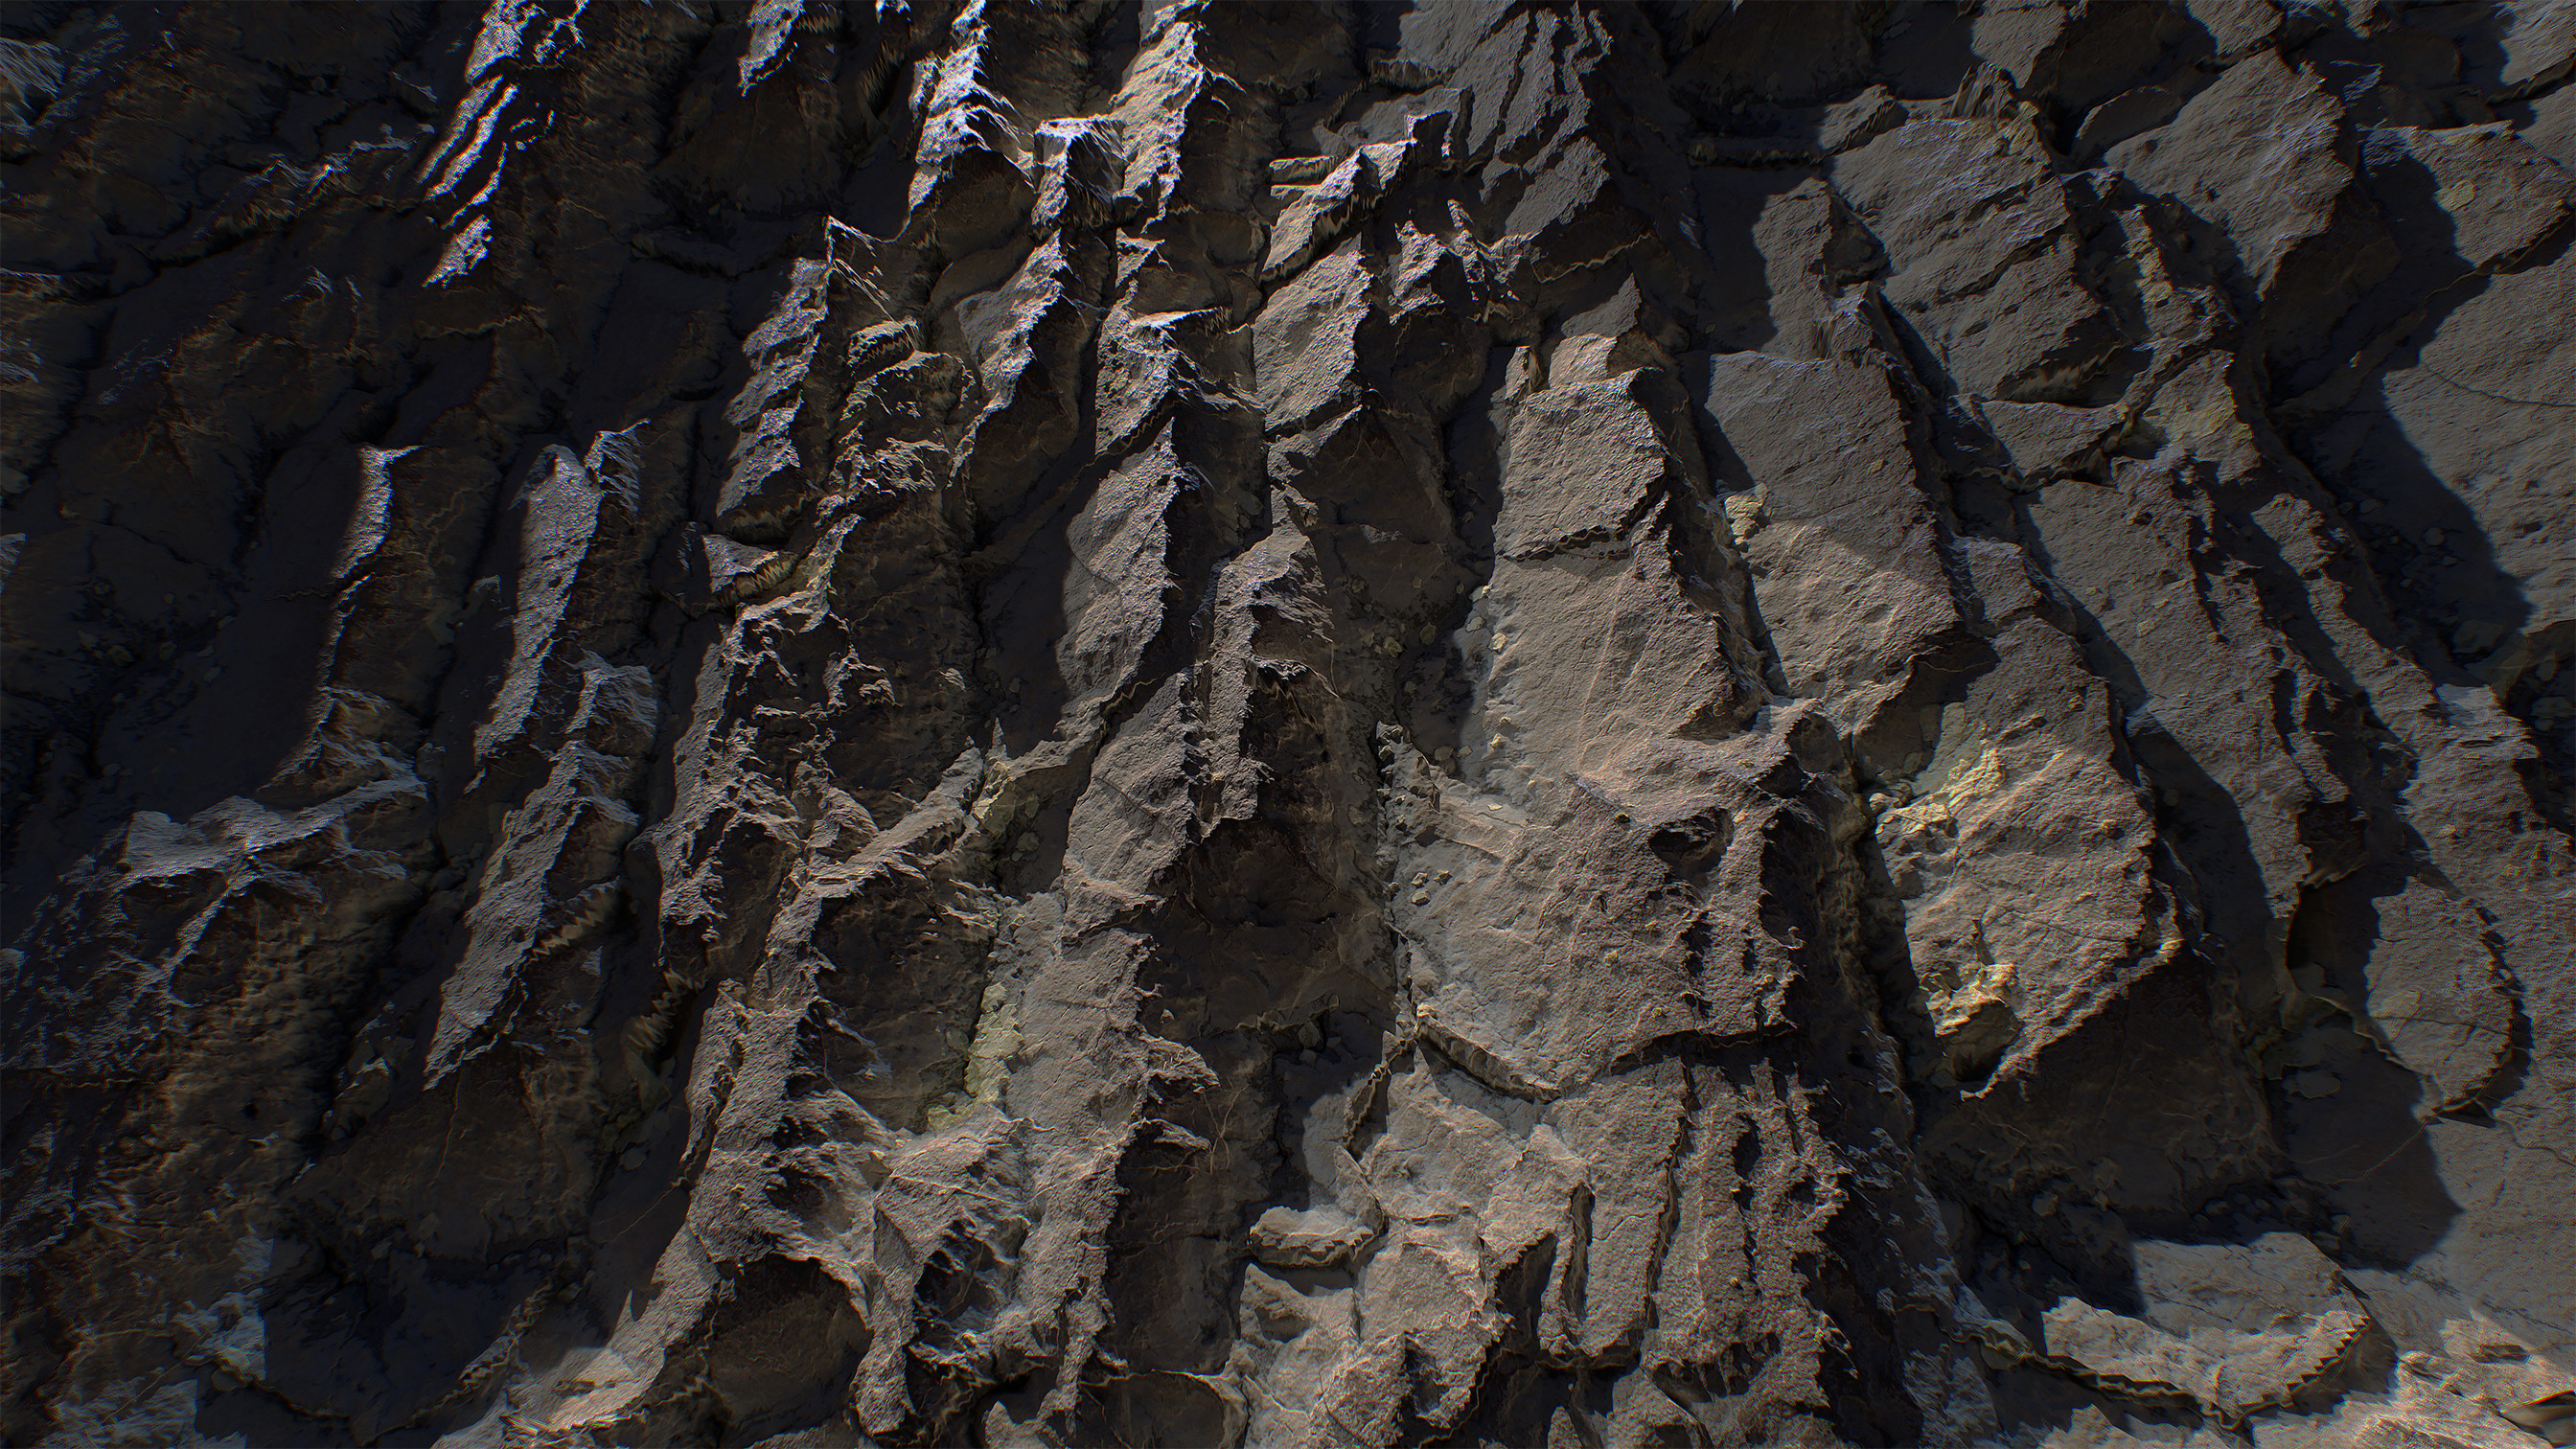 Sharp Cliff Study made 100% in Substance Designer and rendered in Marmoset Toolbag 4.